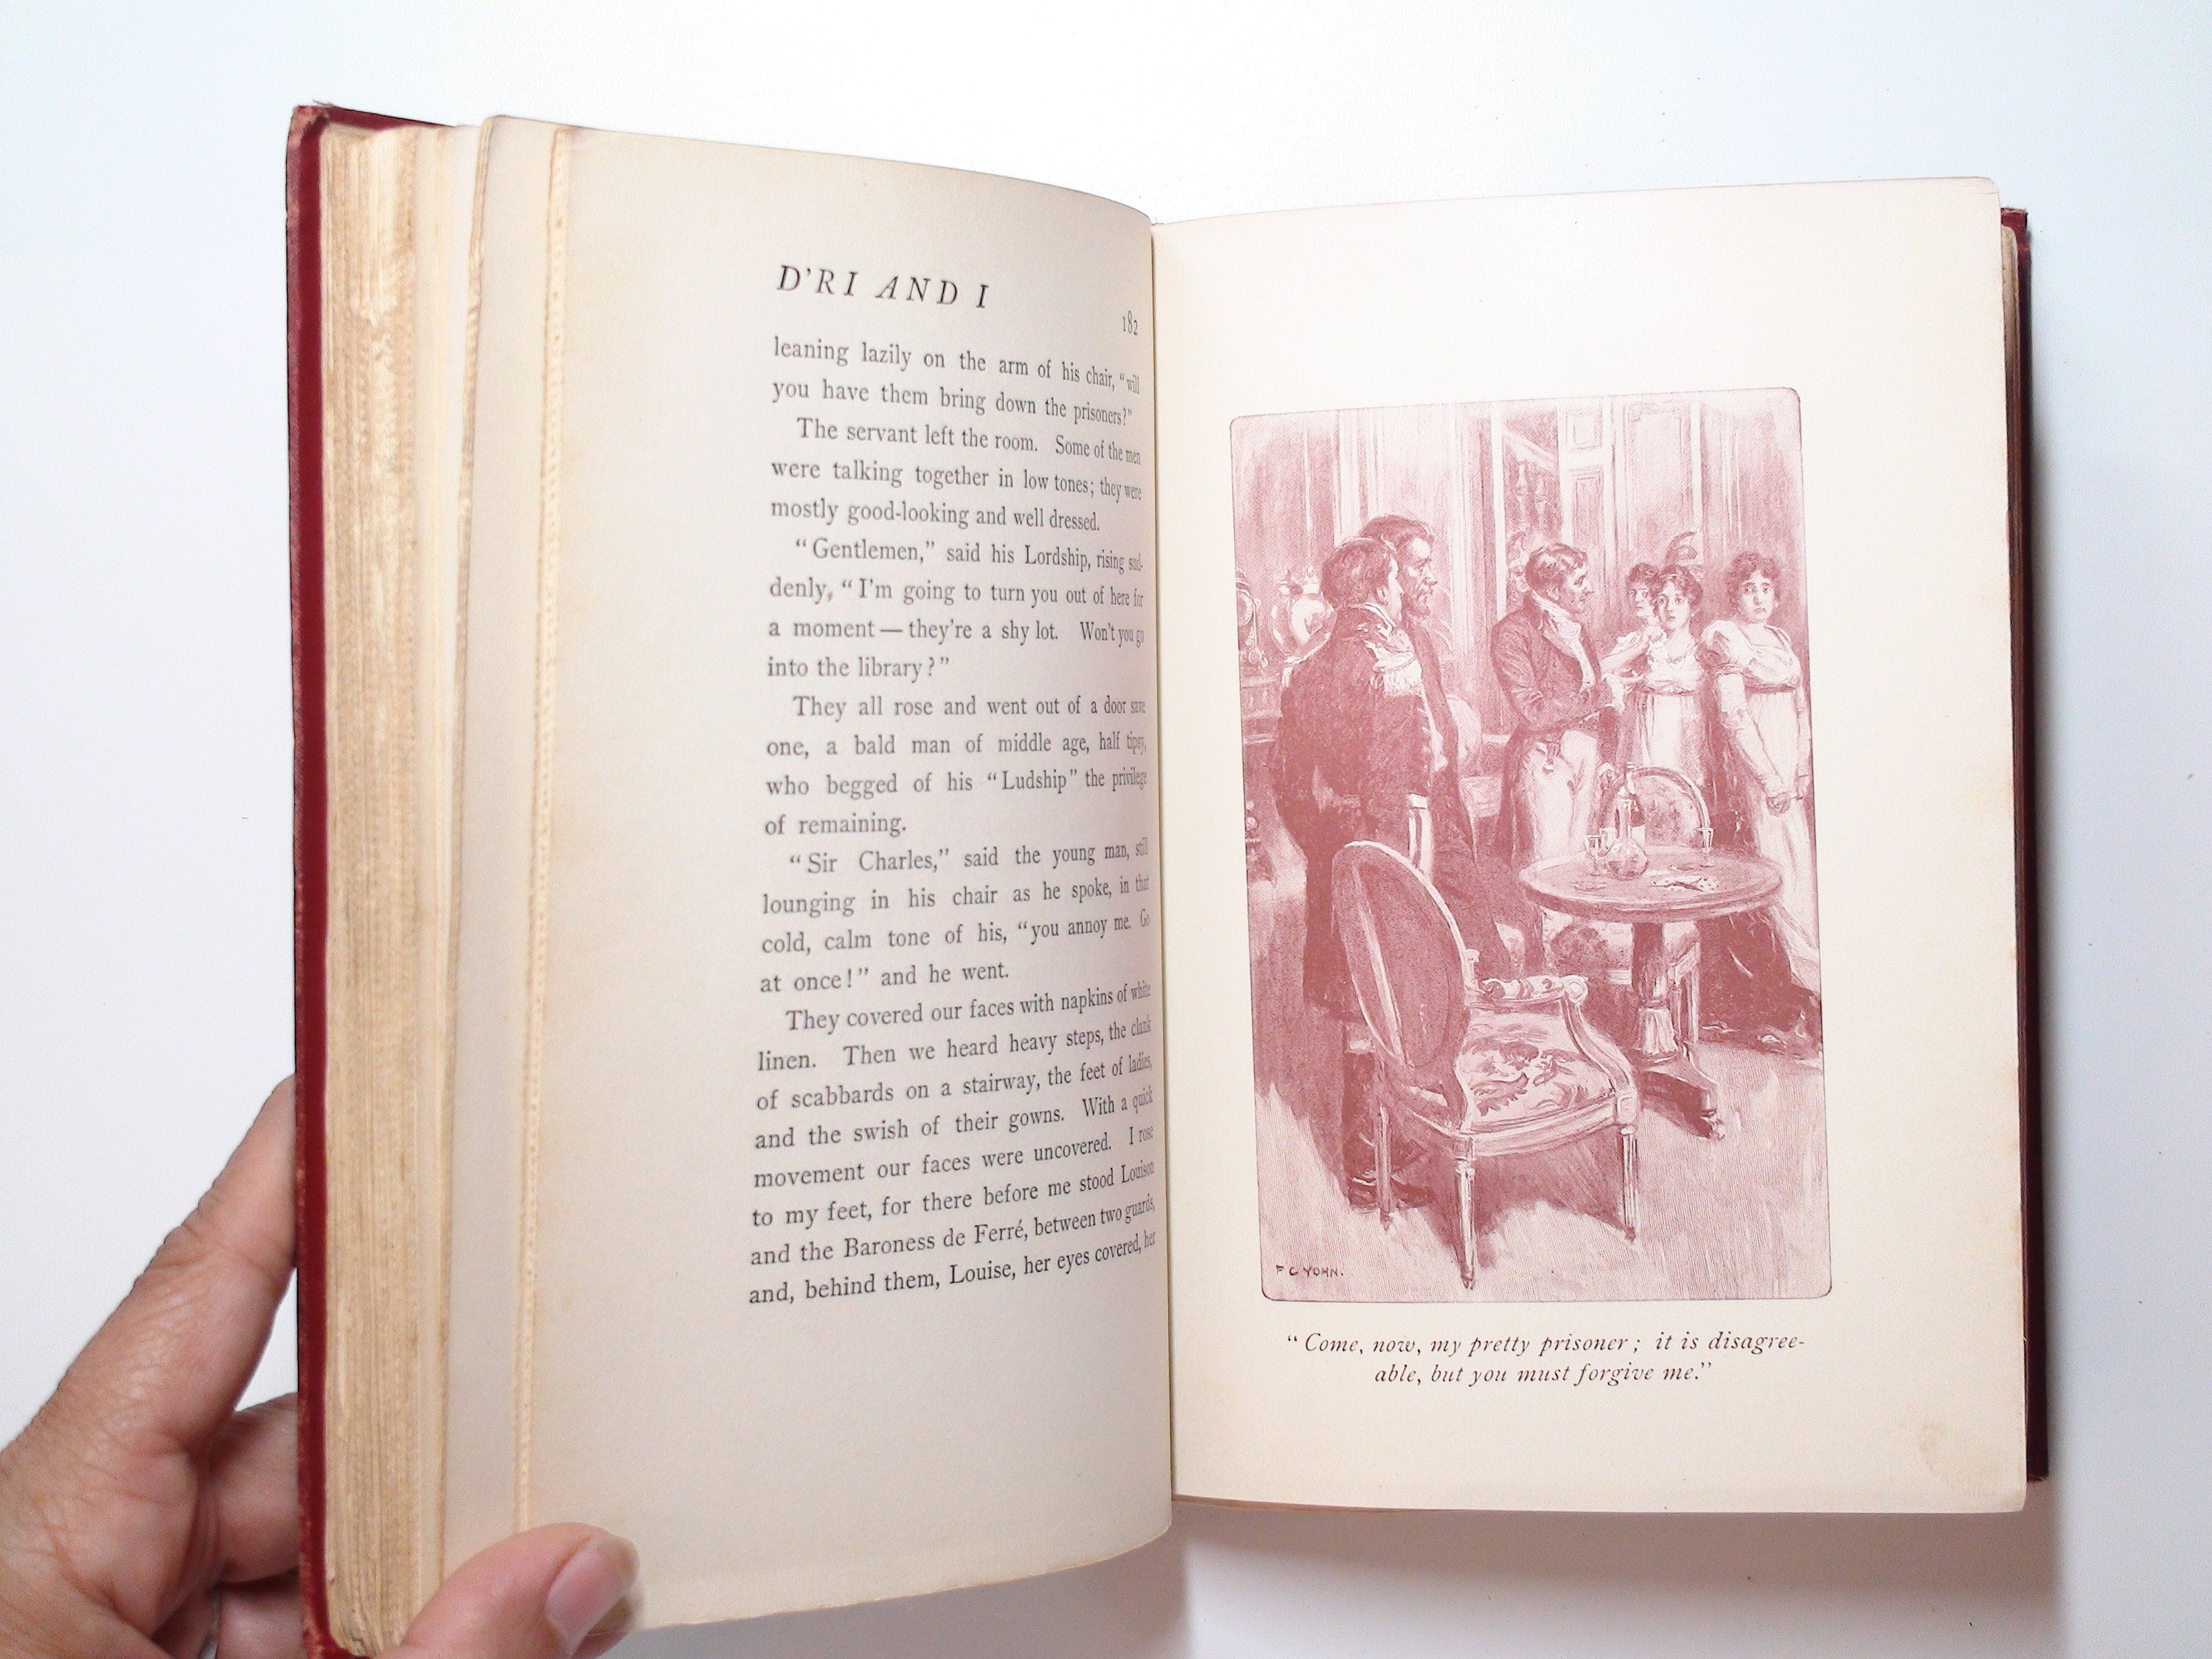 D'ri and I, by Irving Bacheller, Illustrated by F. C. Yohn, 1st Ed, 1901